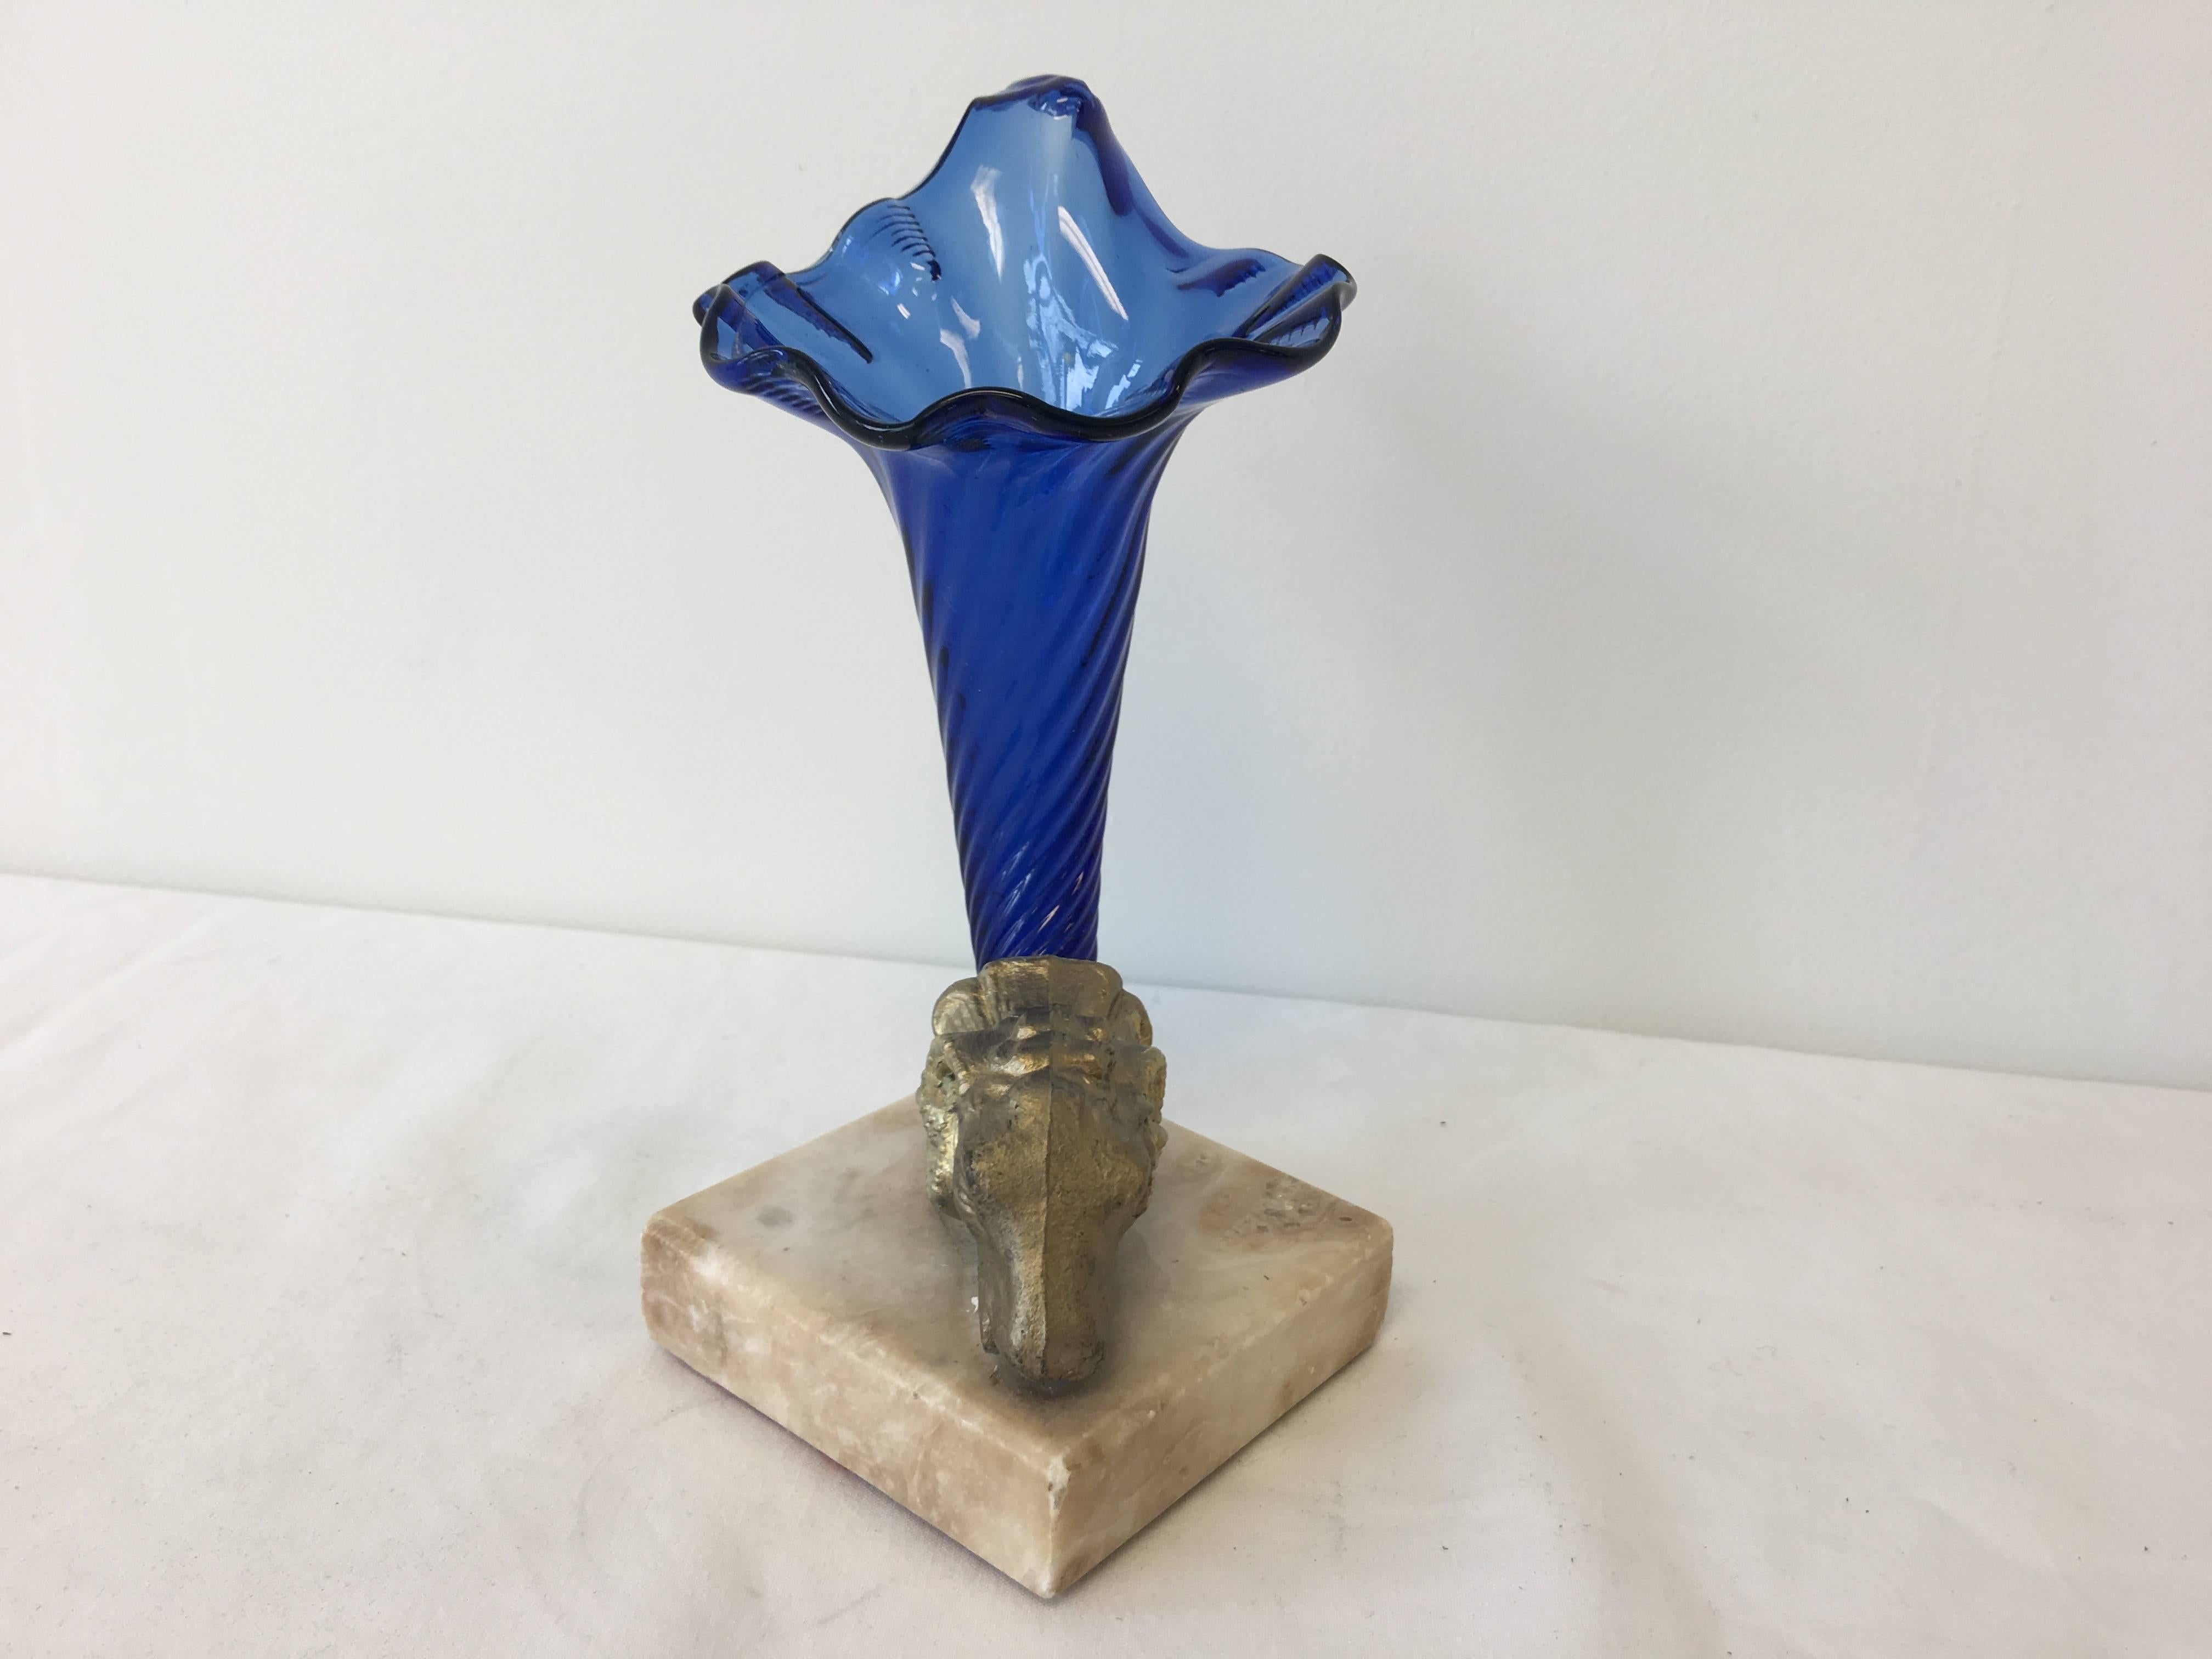 Offered is a stunning, 19th century Baccarat, Art Nouveau blue glass epergne vase. Features a bronze ram head, rested upon a white or off-white marble base.